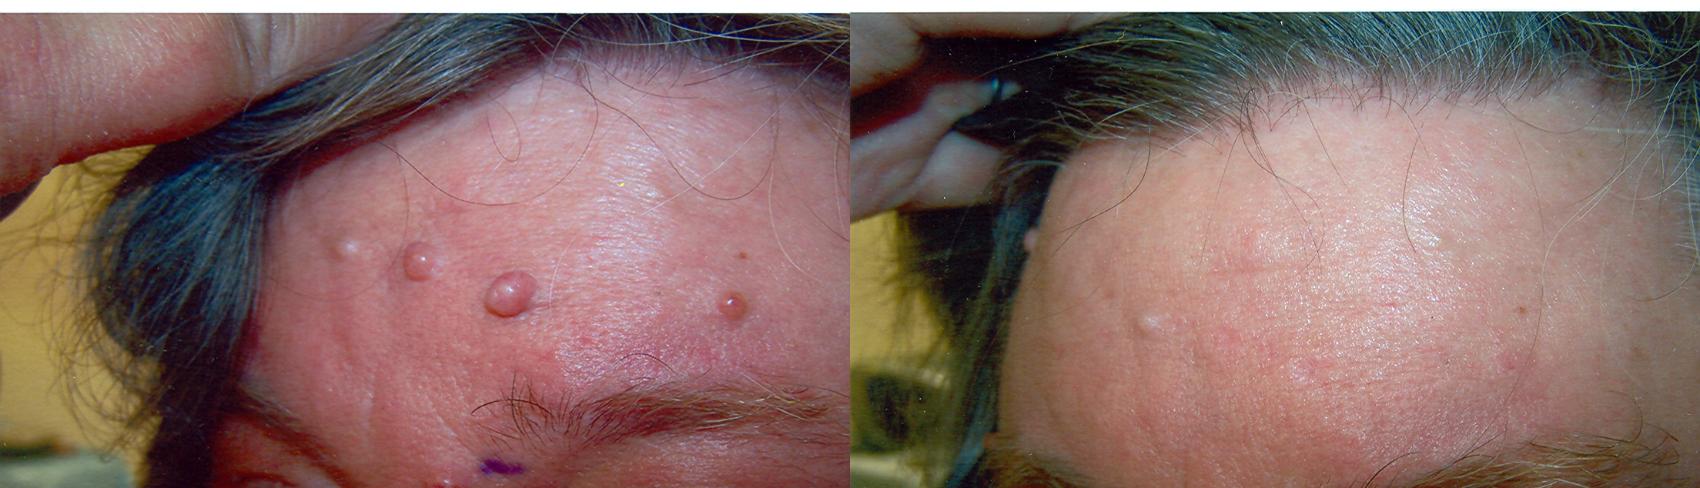 cosmetic removal of moles skin tags 38 view 1 detail